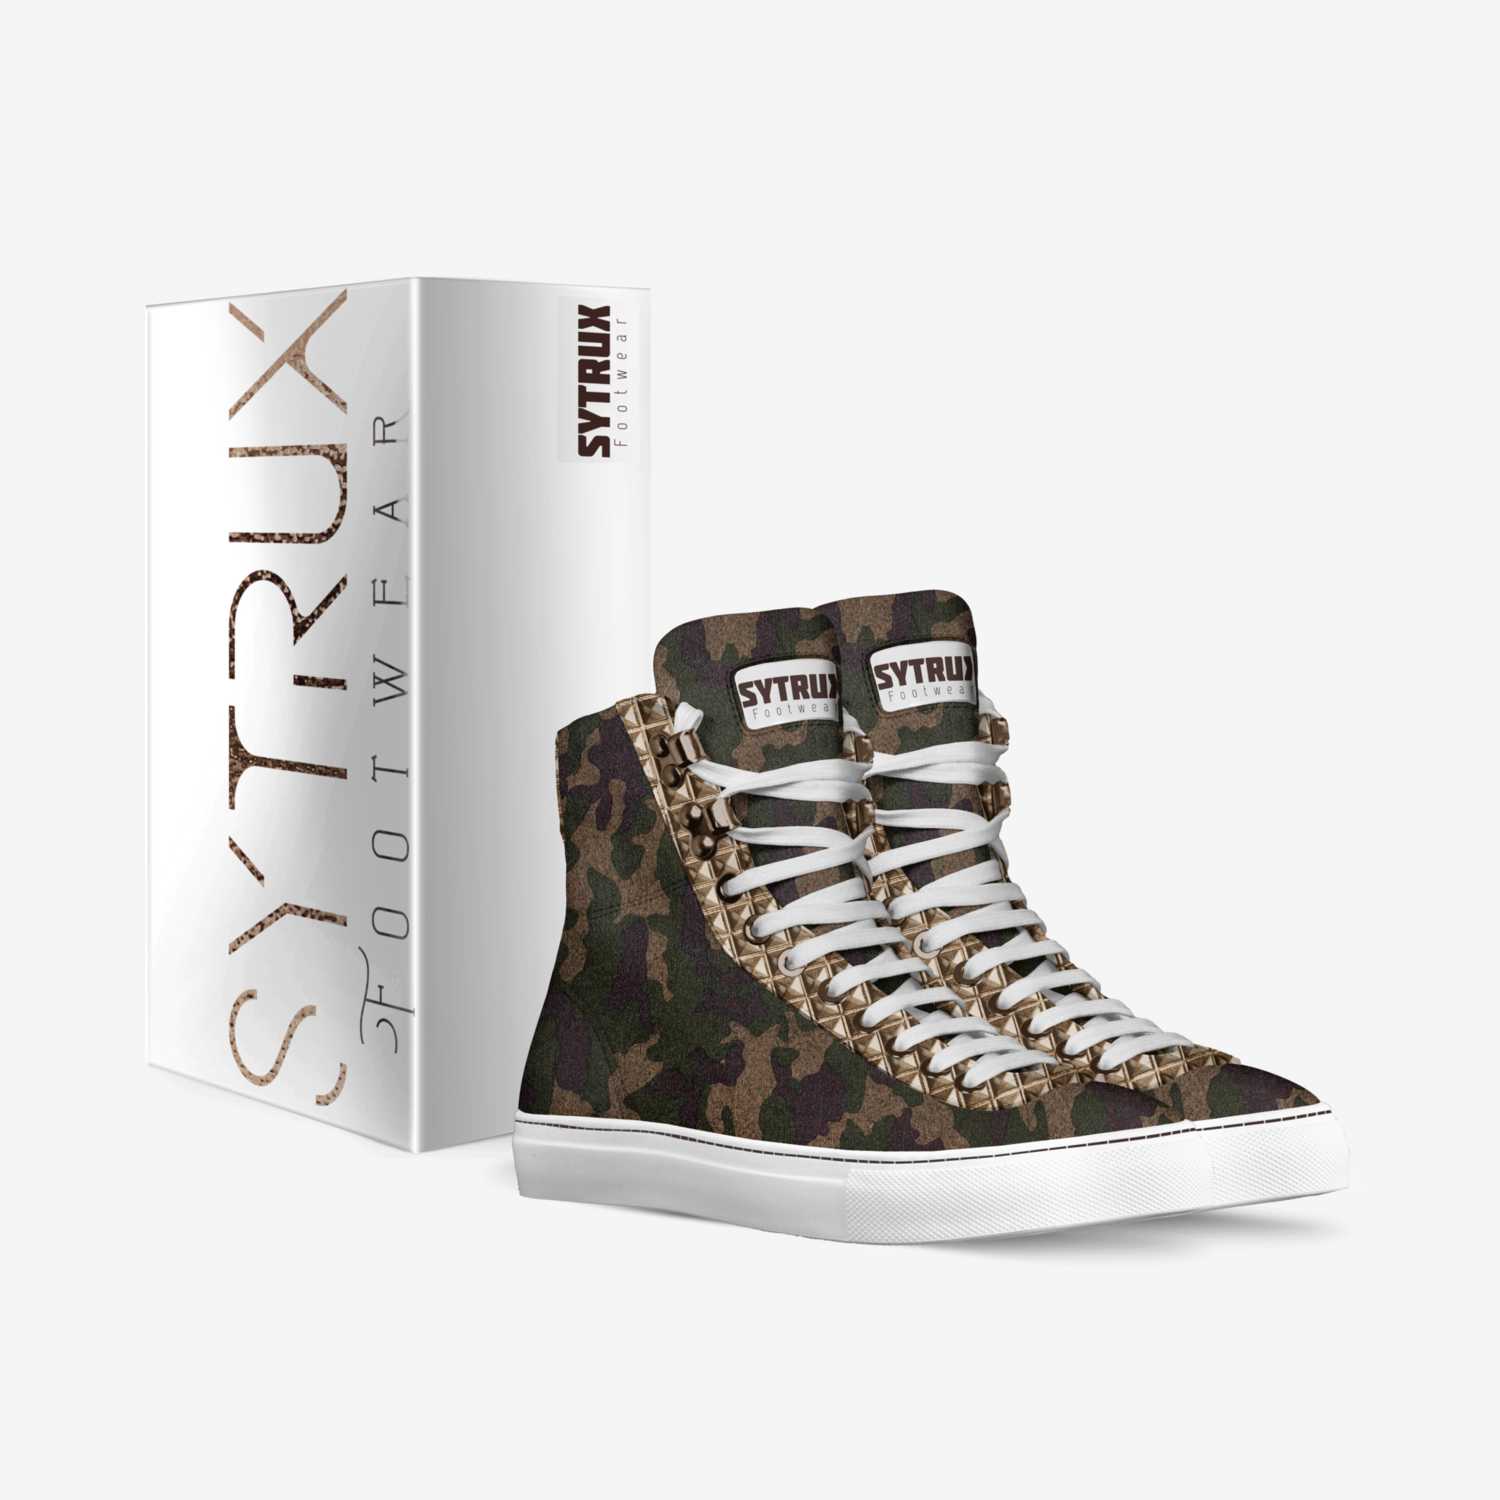 Sytrux Footwear custom made in Italy shoes by Curtis Jerrod | Box view